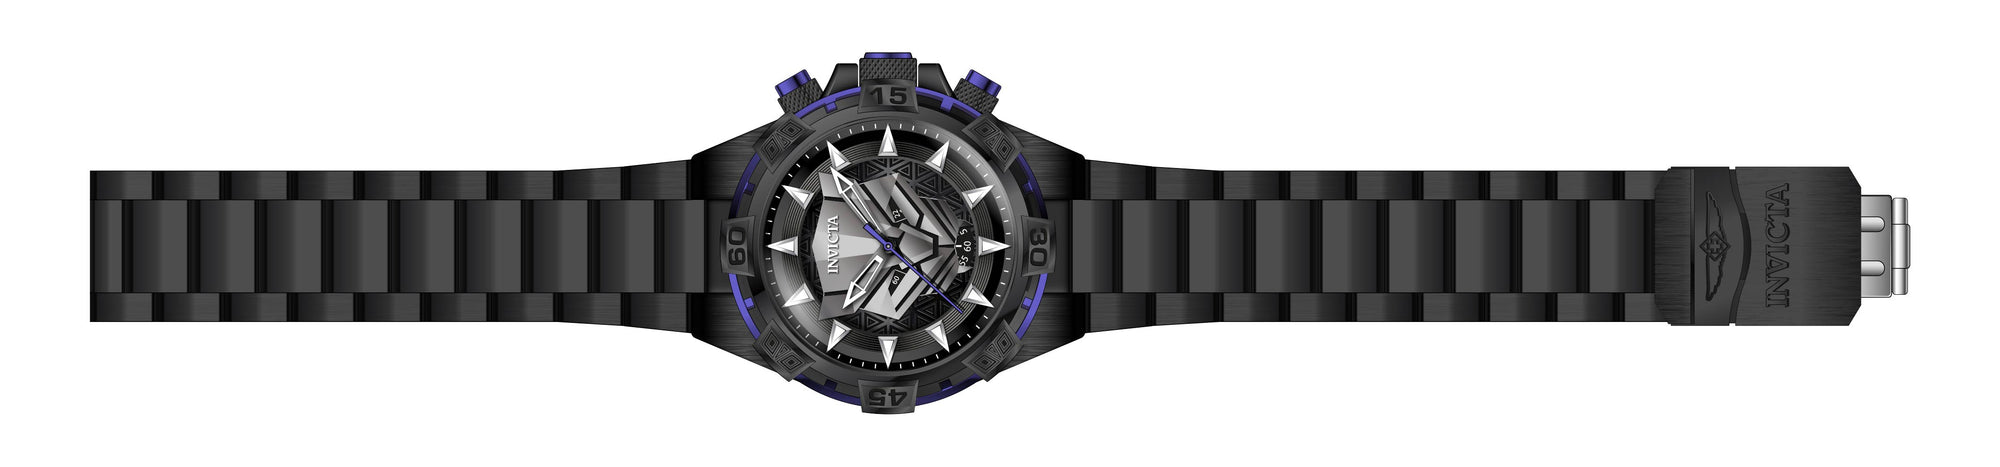 Band For Invicta Marvel 36607